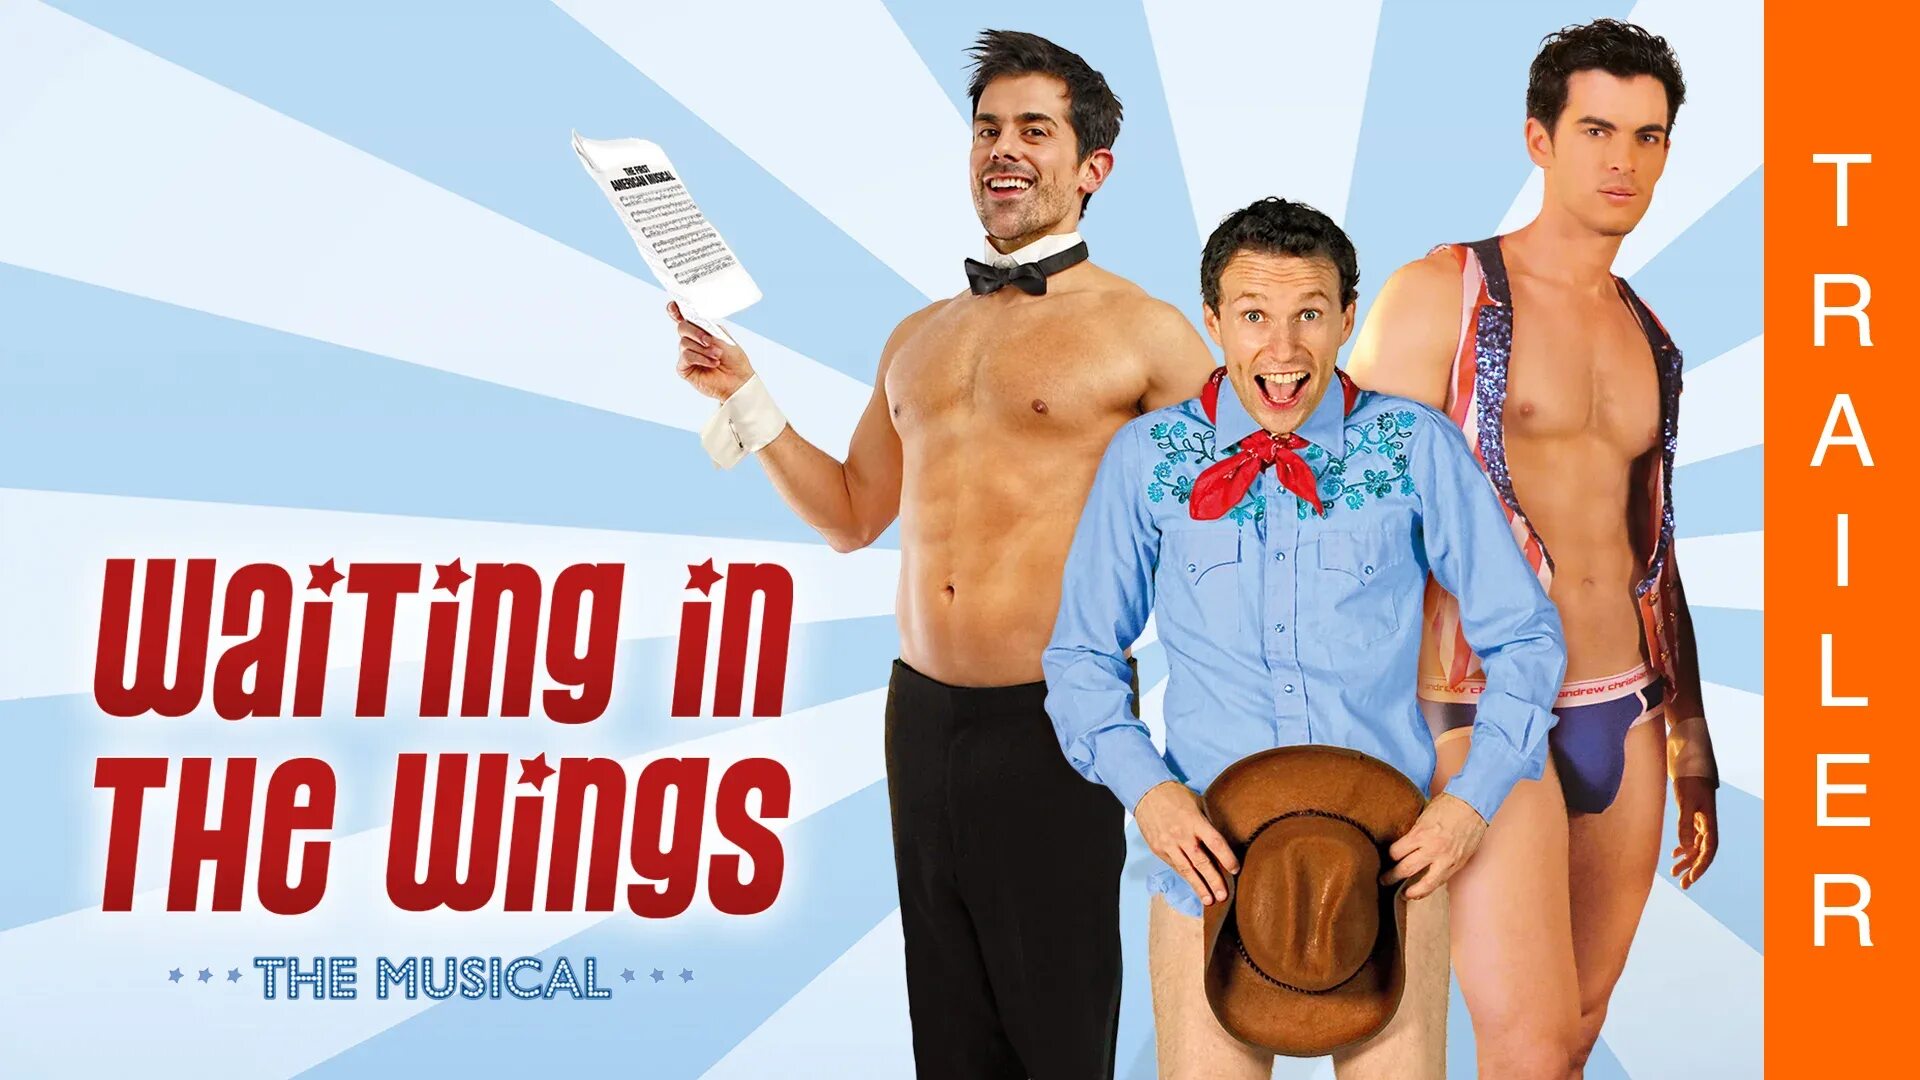 Waiting in the Wings. Waiting in the Wings - the Musical (2014). Movie waiting. Wing. Waiting films